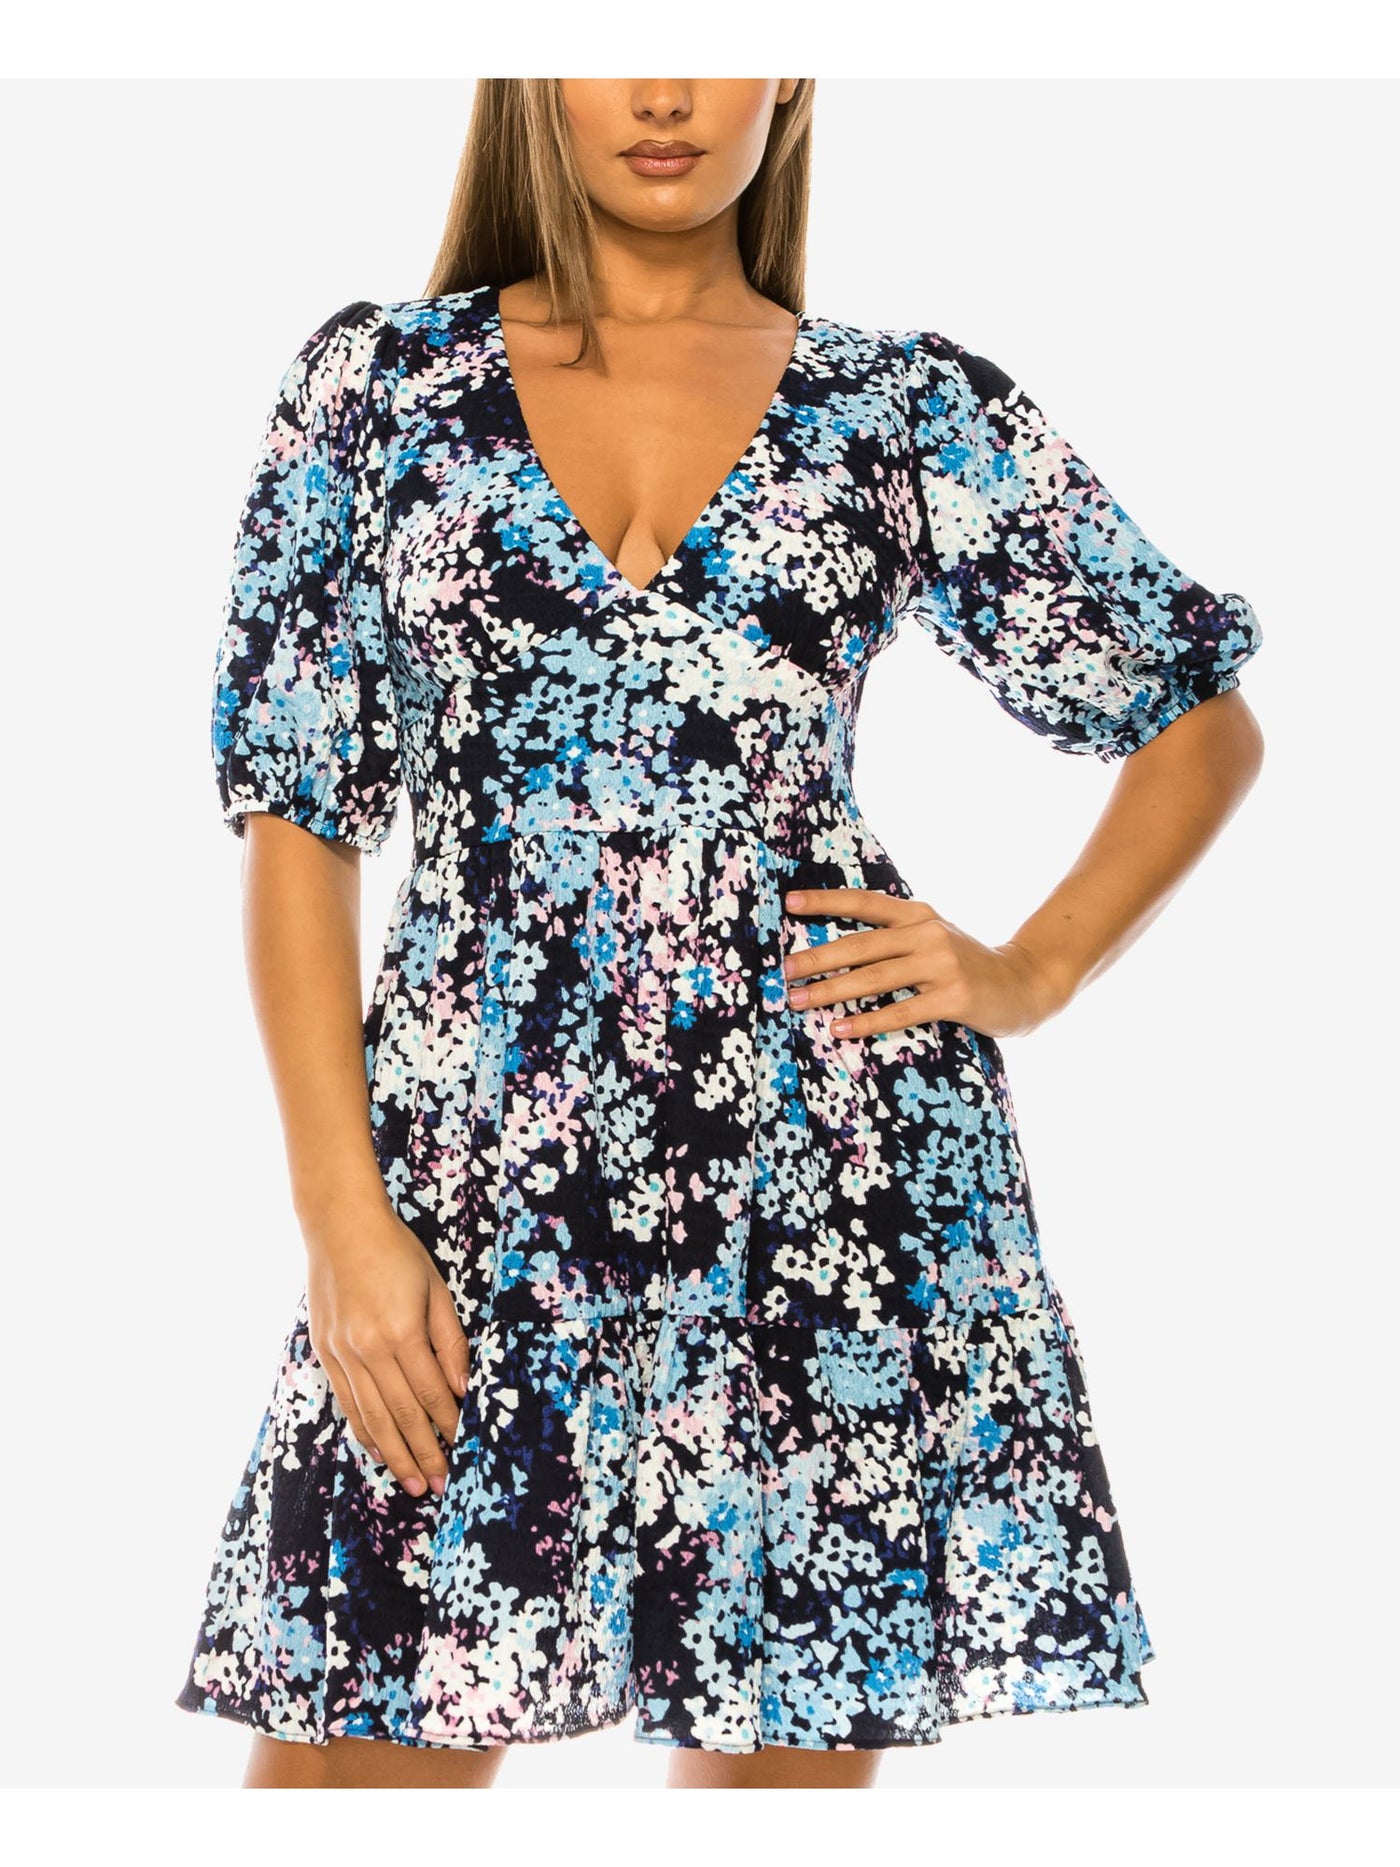 B DARLIN Womens Navy Printed Pouf Sleeve V Neck Above The Knee Party A-Line Dress Juniors 11\12